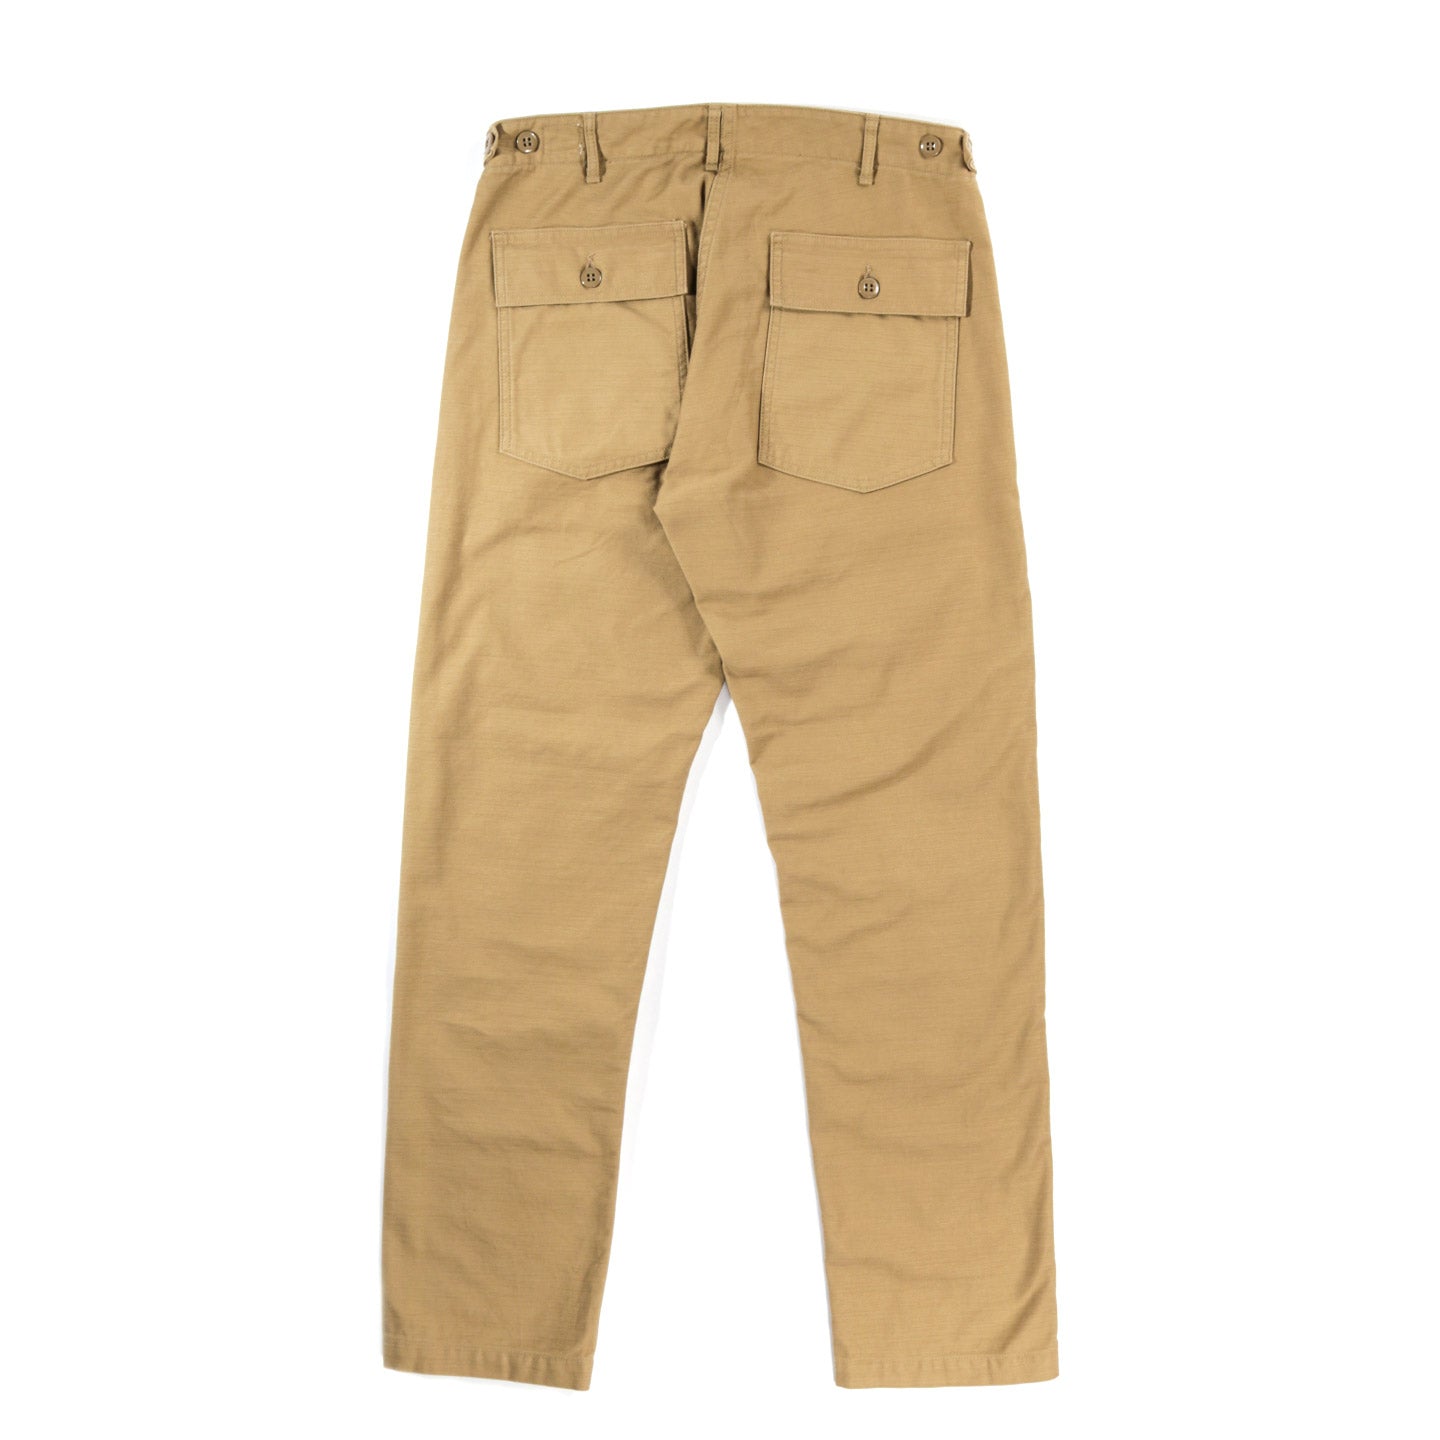 ORSLOW SLIM FIT FATIGUE PANTS KHAKI REVERSE SATEEN | TODAY CLOTHING